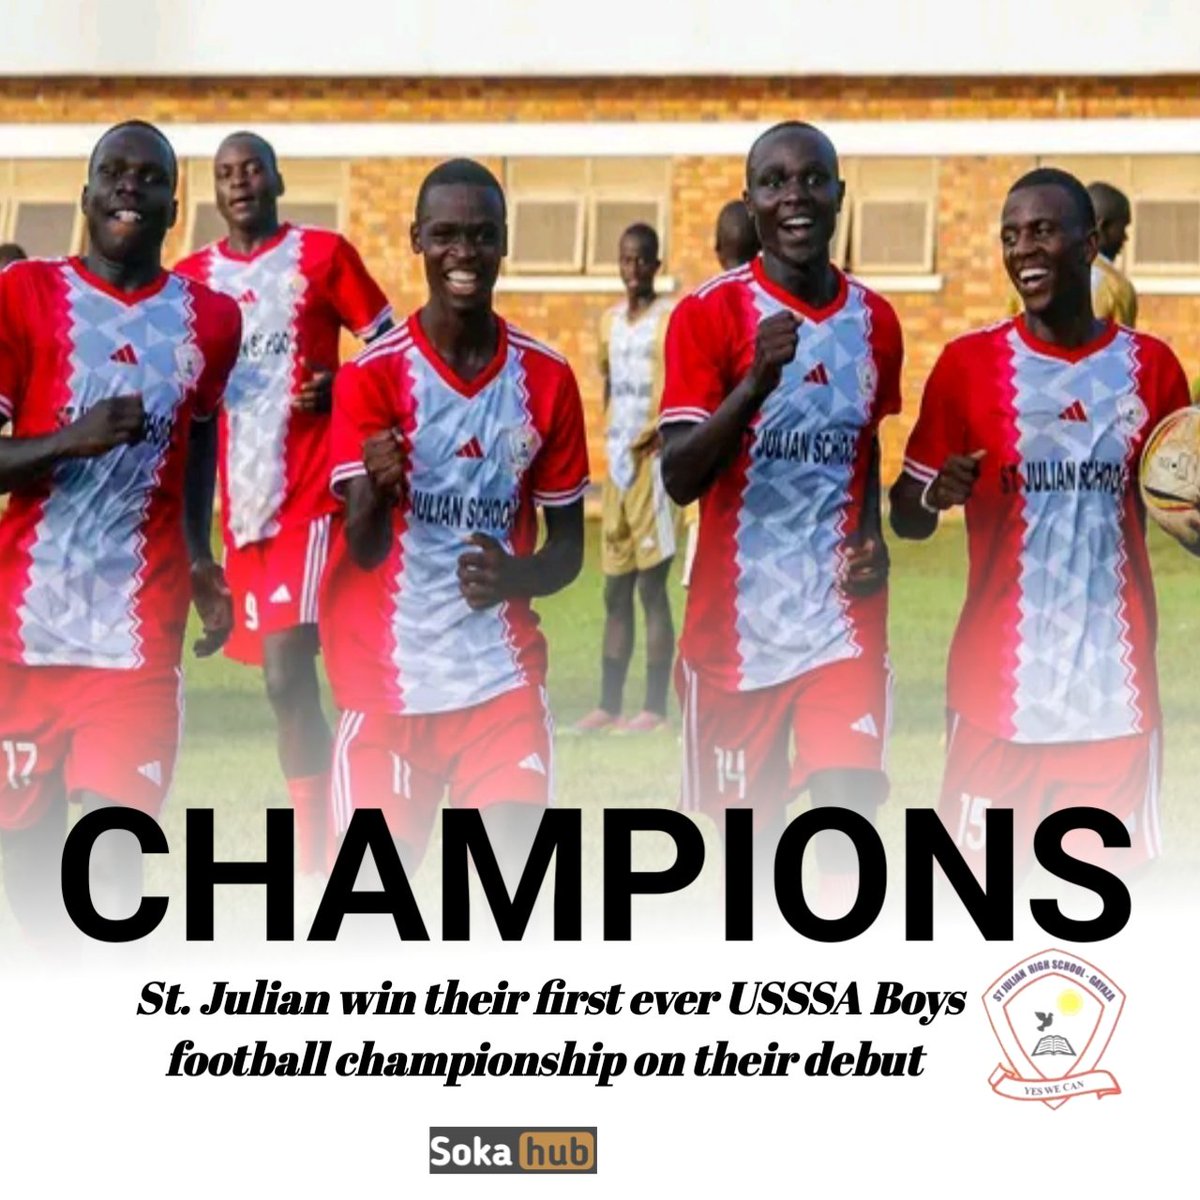 St Julian are champions of USSSA Boys Football Championship for the first time.